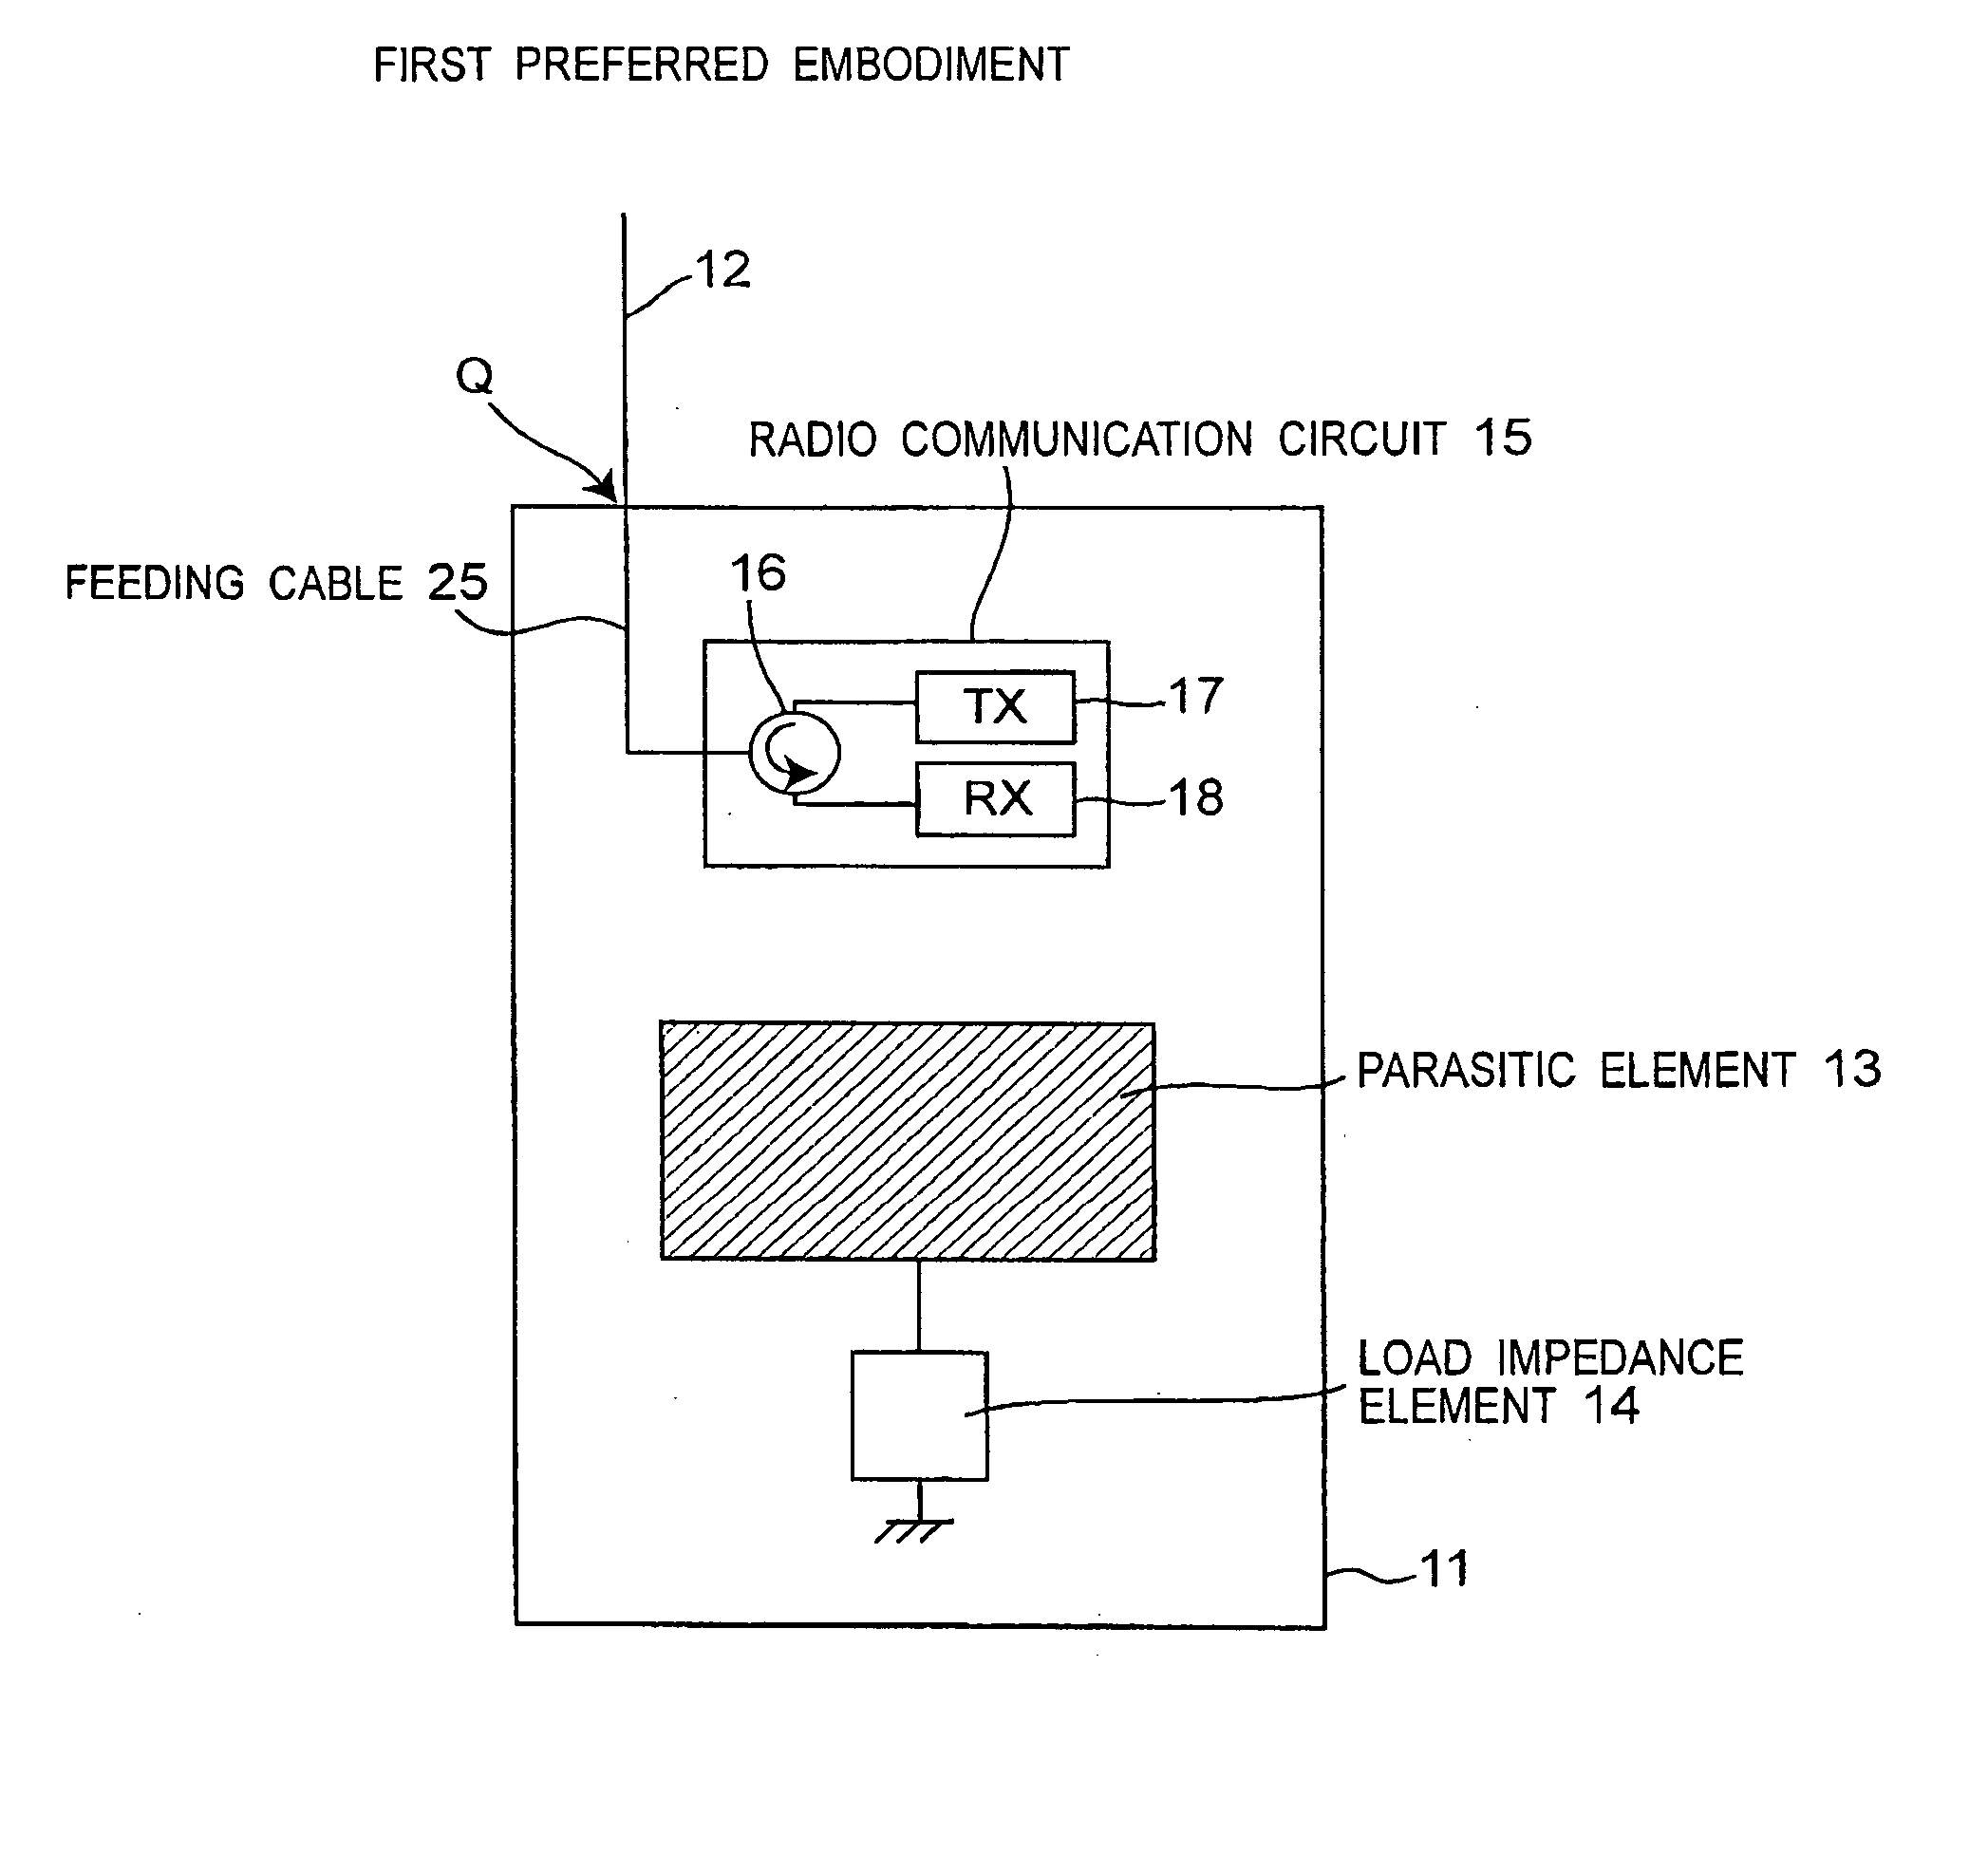 Radio antenna apparatus provided with controller for controlling SAR and radio communication apparatus using the same radio antenna apparatus